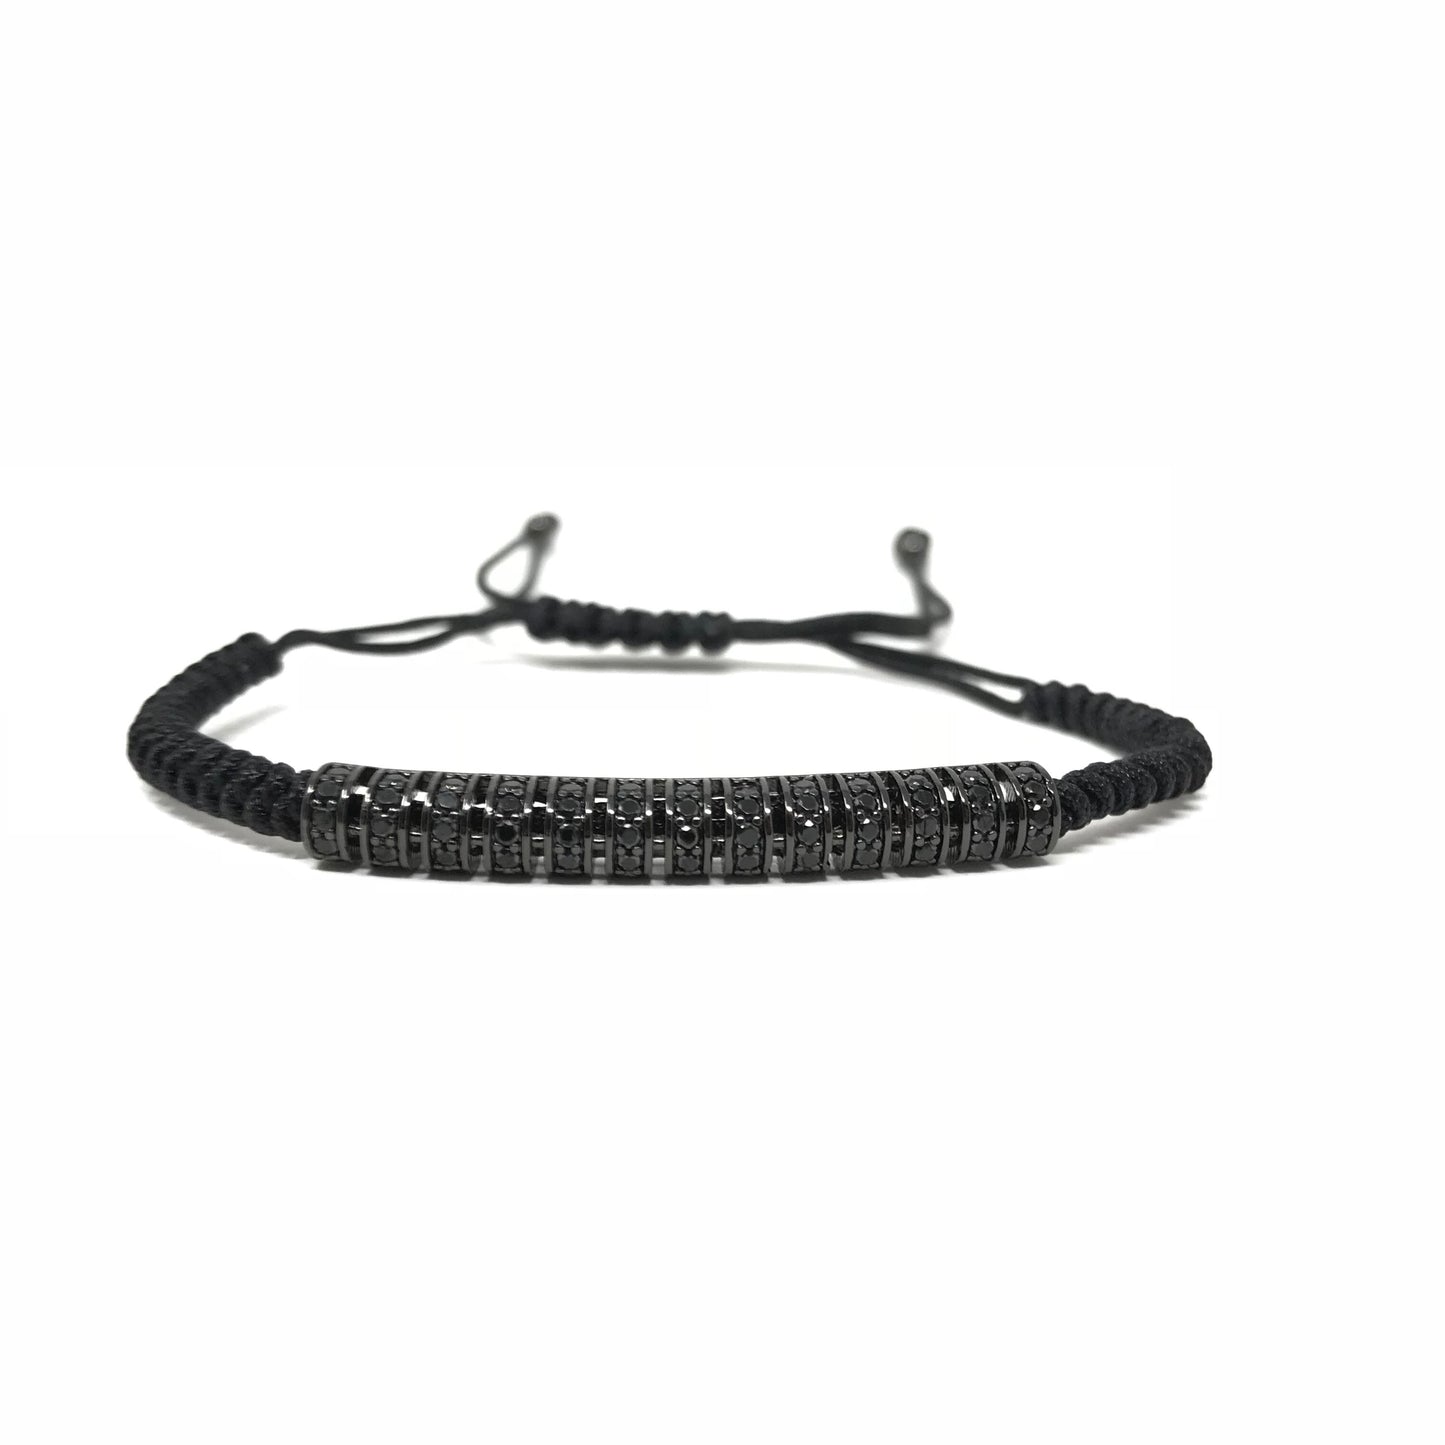 Riviere Bracelet - Retail Therapy Jewelry